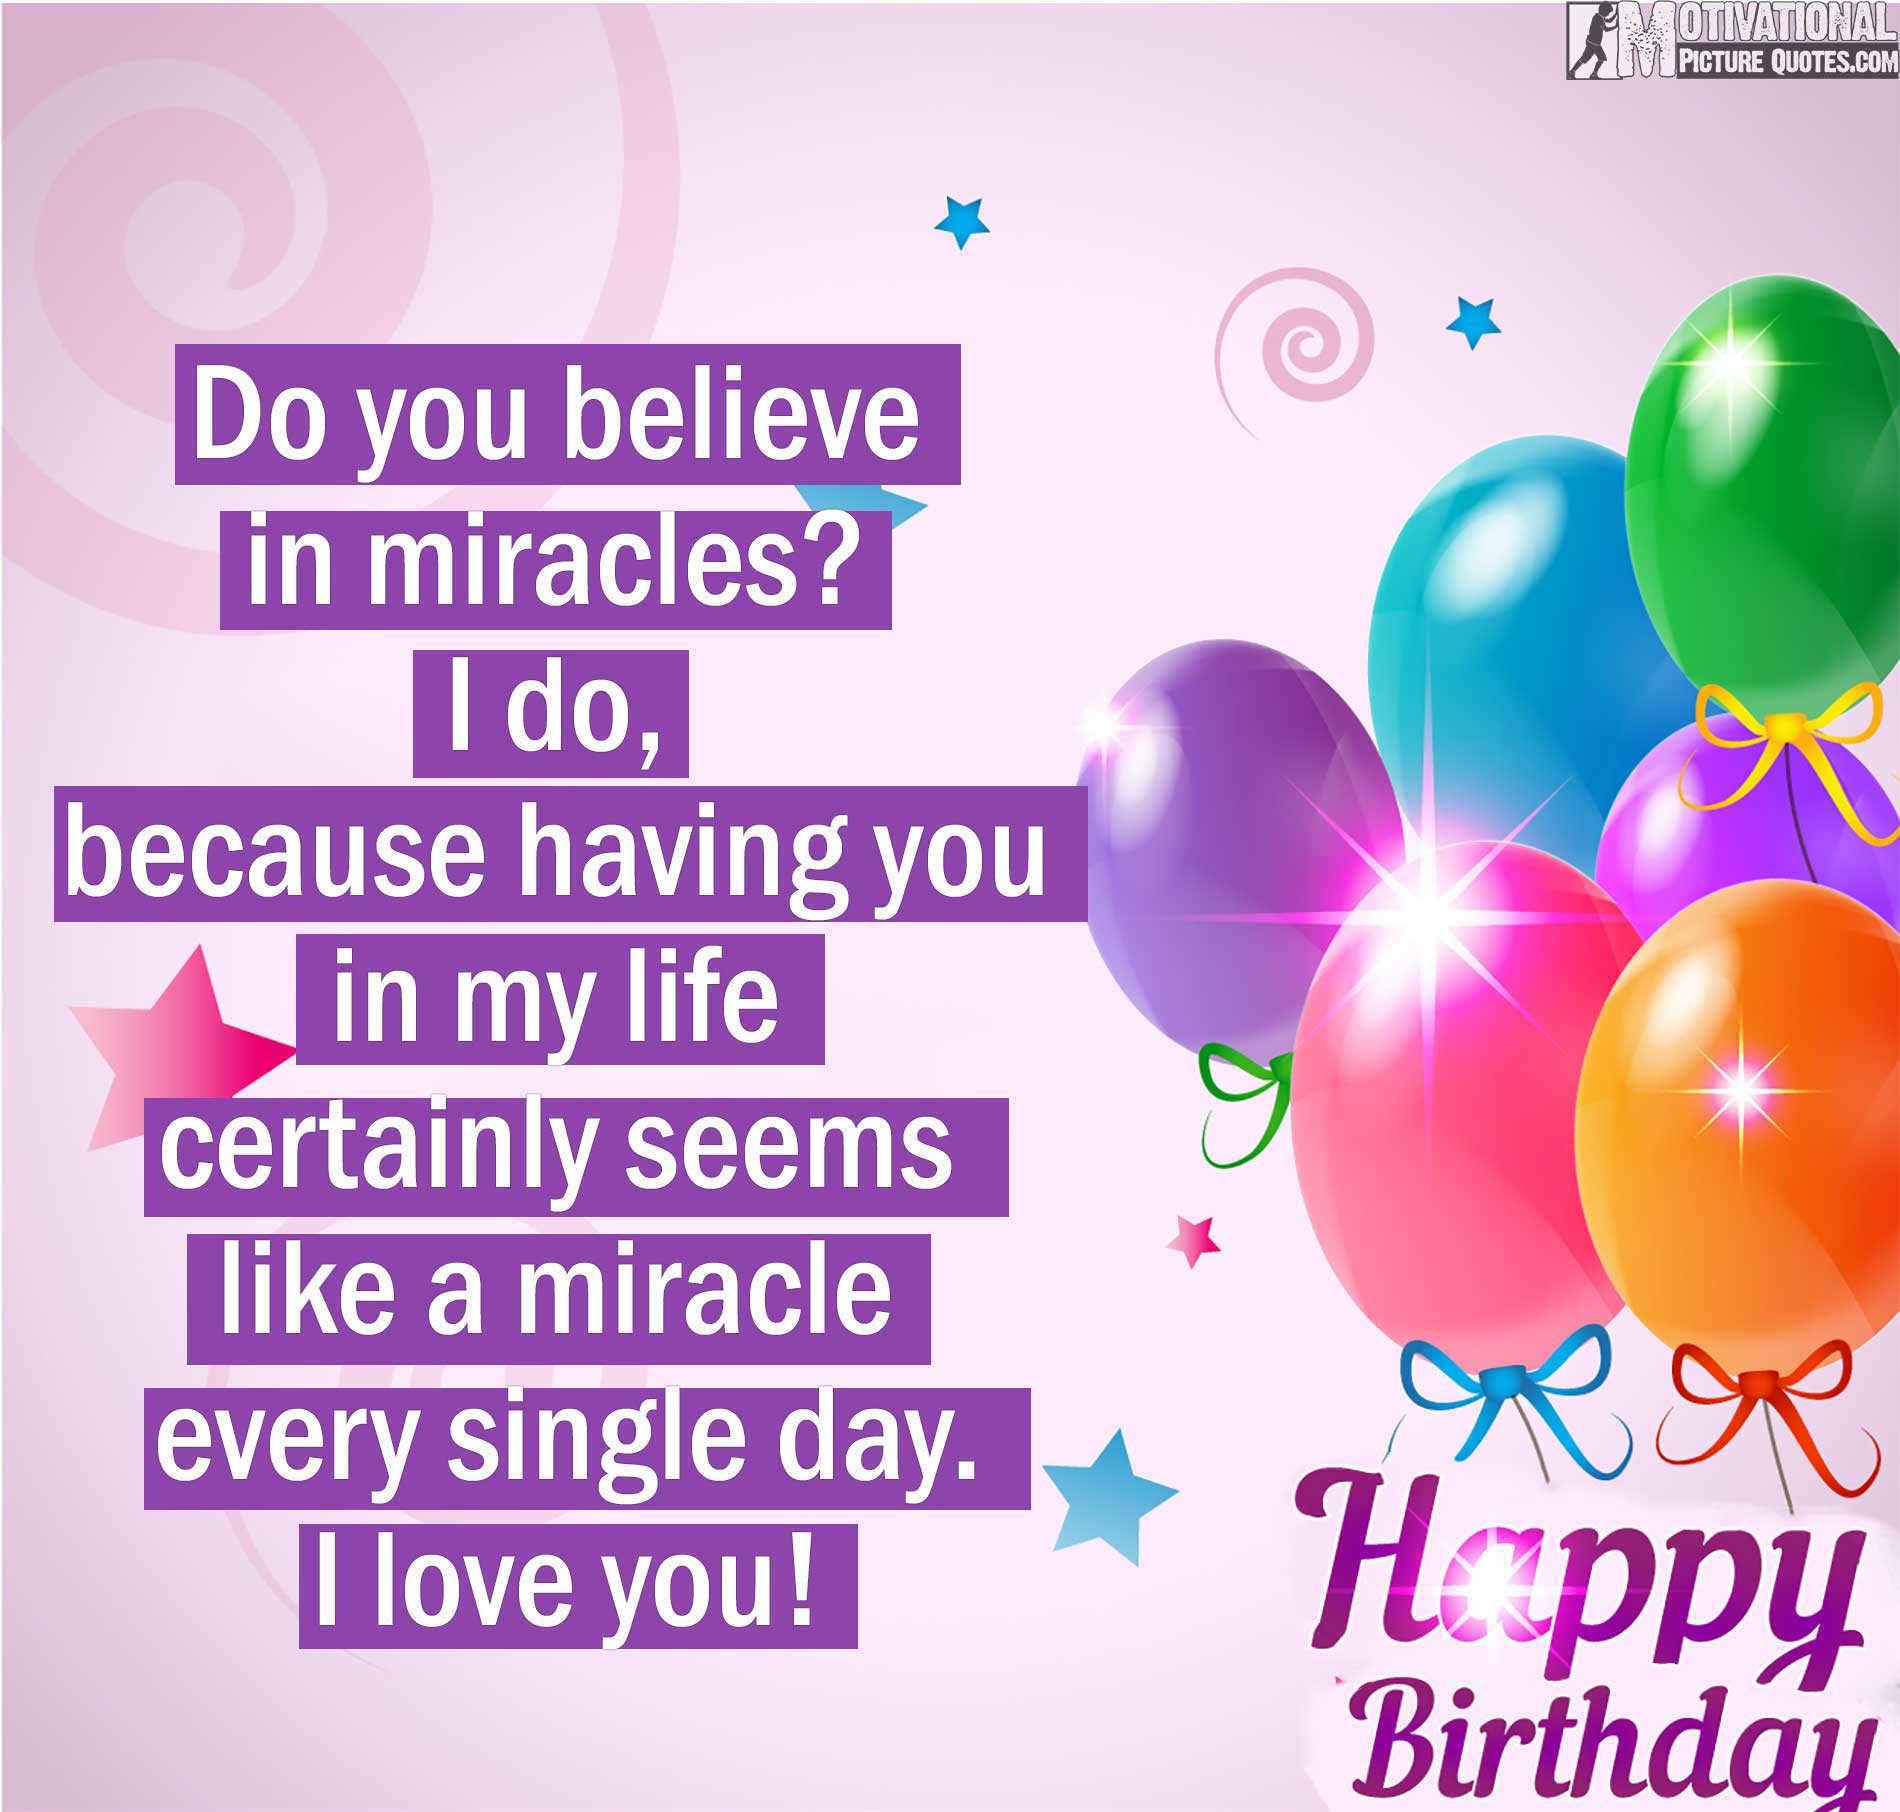 Quotes For Girlfriend Birthday
 35 Inspirational Birthday Quotes